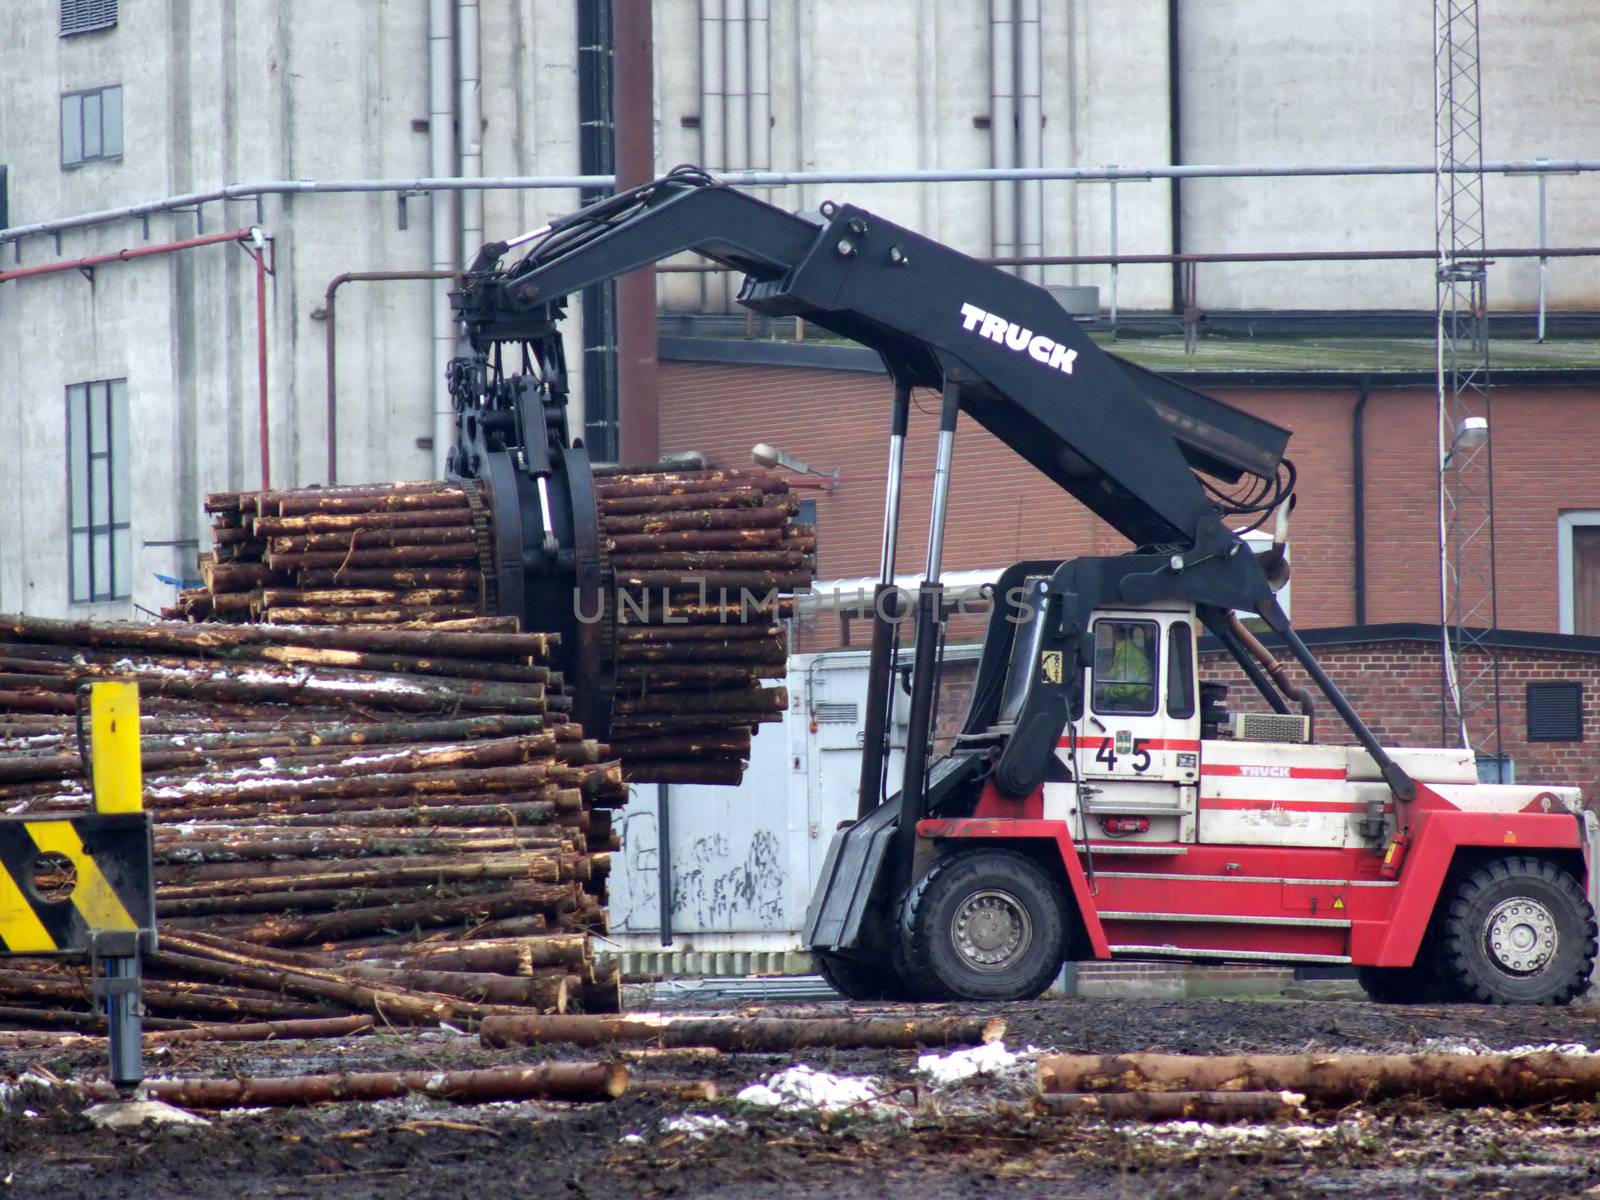 portrait of truck loading timber to a boat